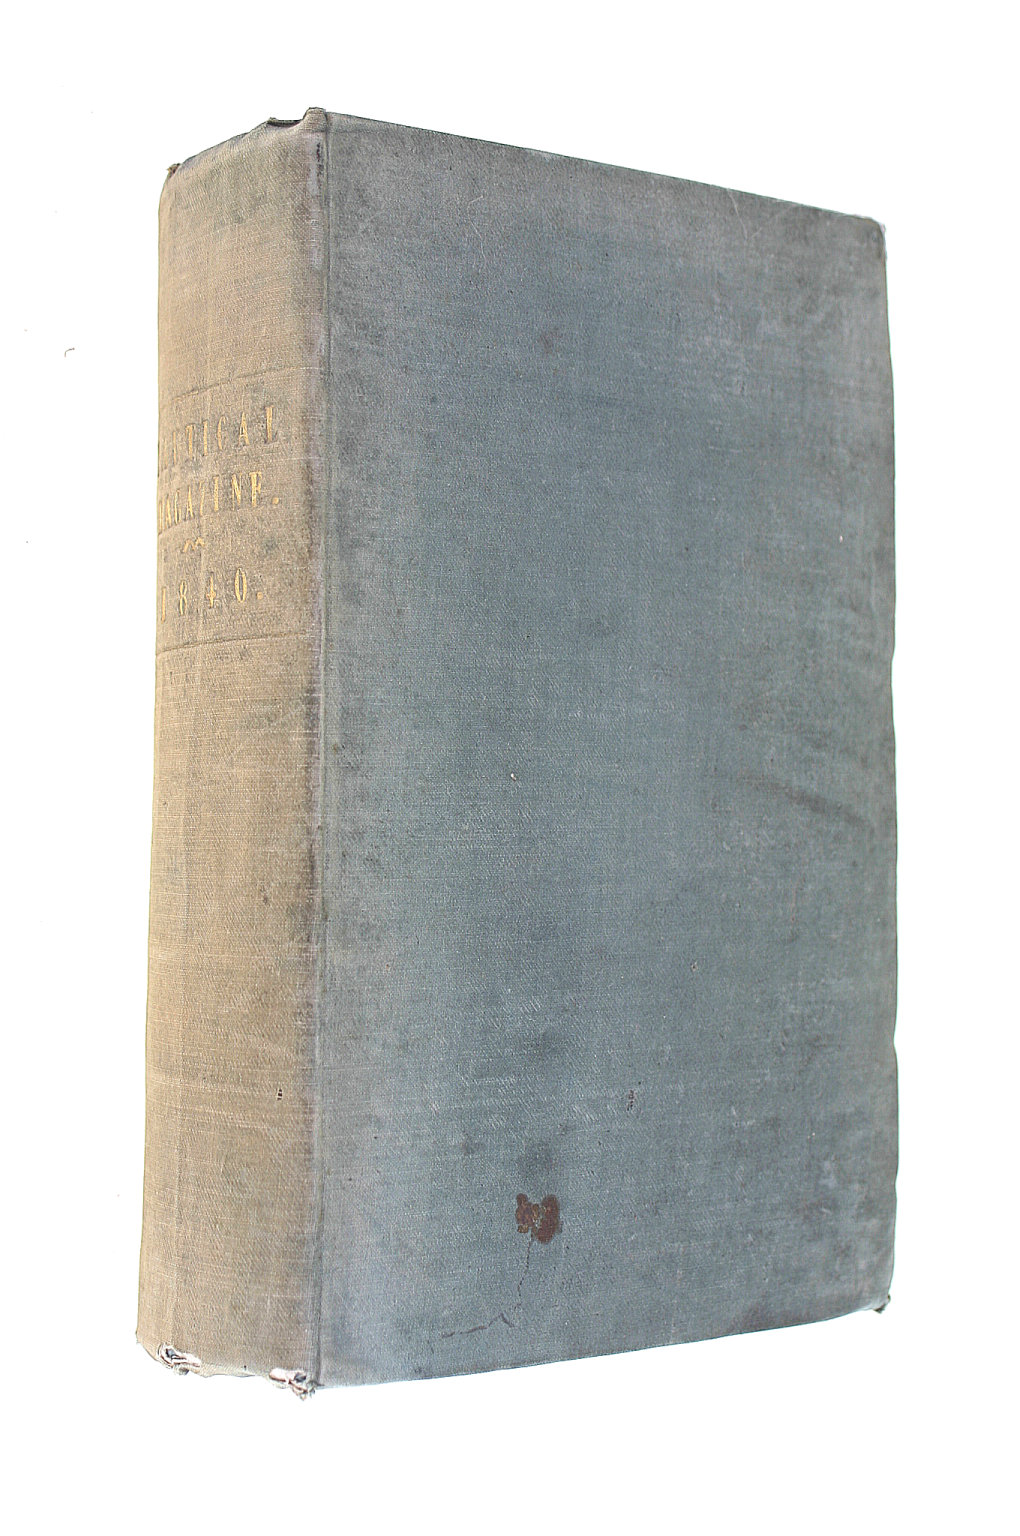 VARIOUS - The Nautical Magazine and Naval Chronicle for 1861. A Journal of Papers on subjects connected with Maritime Affairs [Vol. 30, No. 1 to 12]